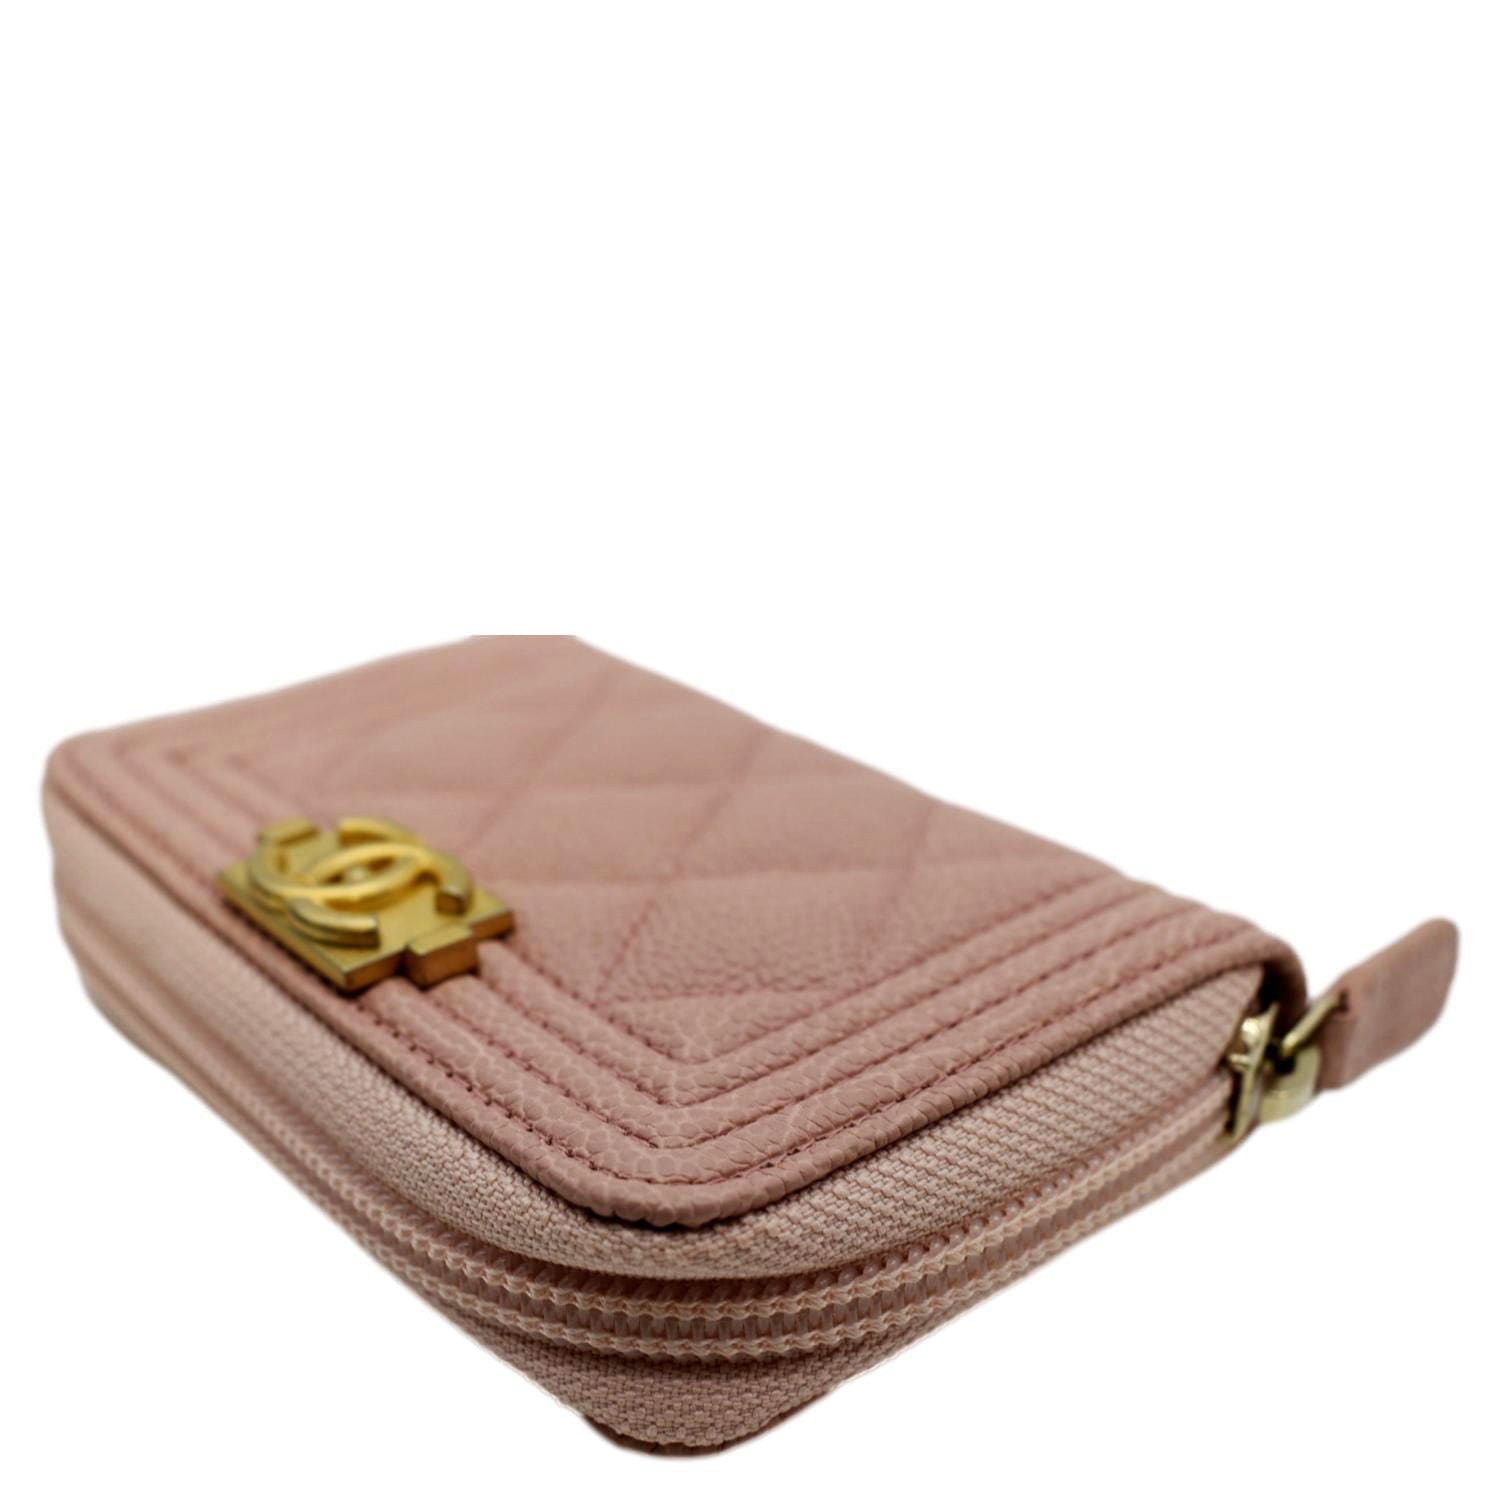 CHANEL, Accessories, Chanel Classic Zipped Coin Purse Beige With Gold  Hardware